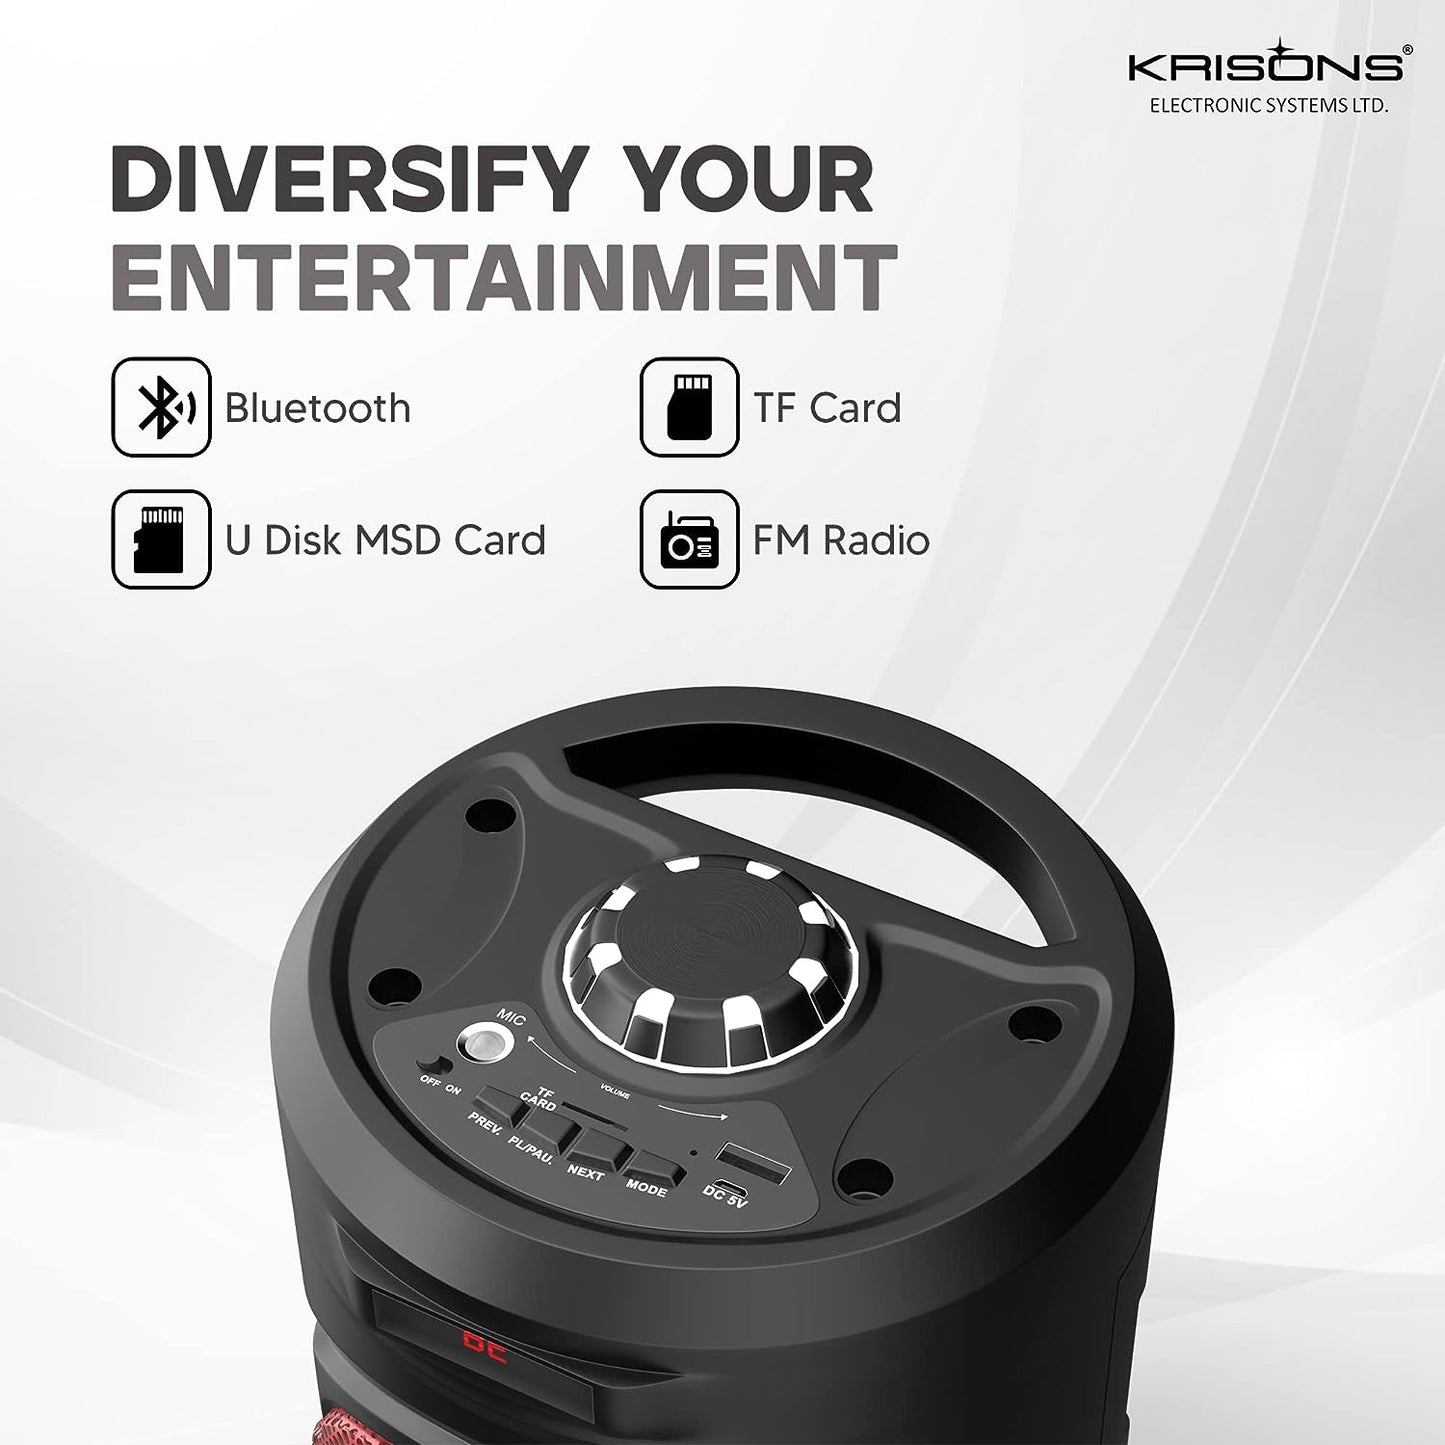 Krisons 4" RedStar Double Woofer 40W Multi-Media Bluetooth Party Speaker with Wired Mic for Karaoke, Digital Display,RGB Lights, USB, SD Card and FM Radio